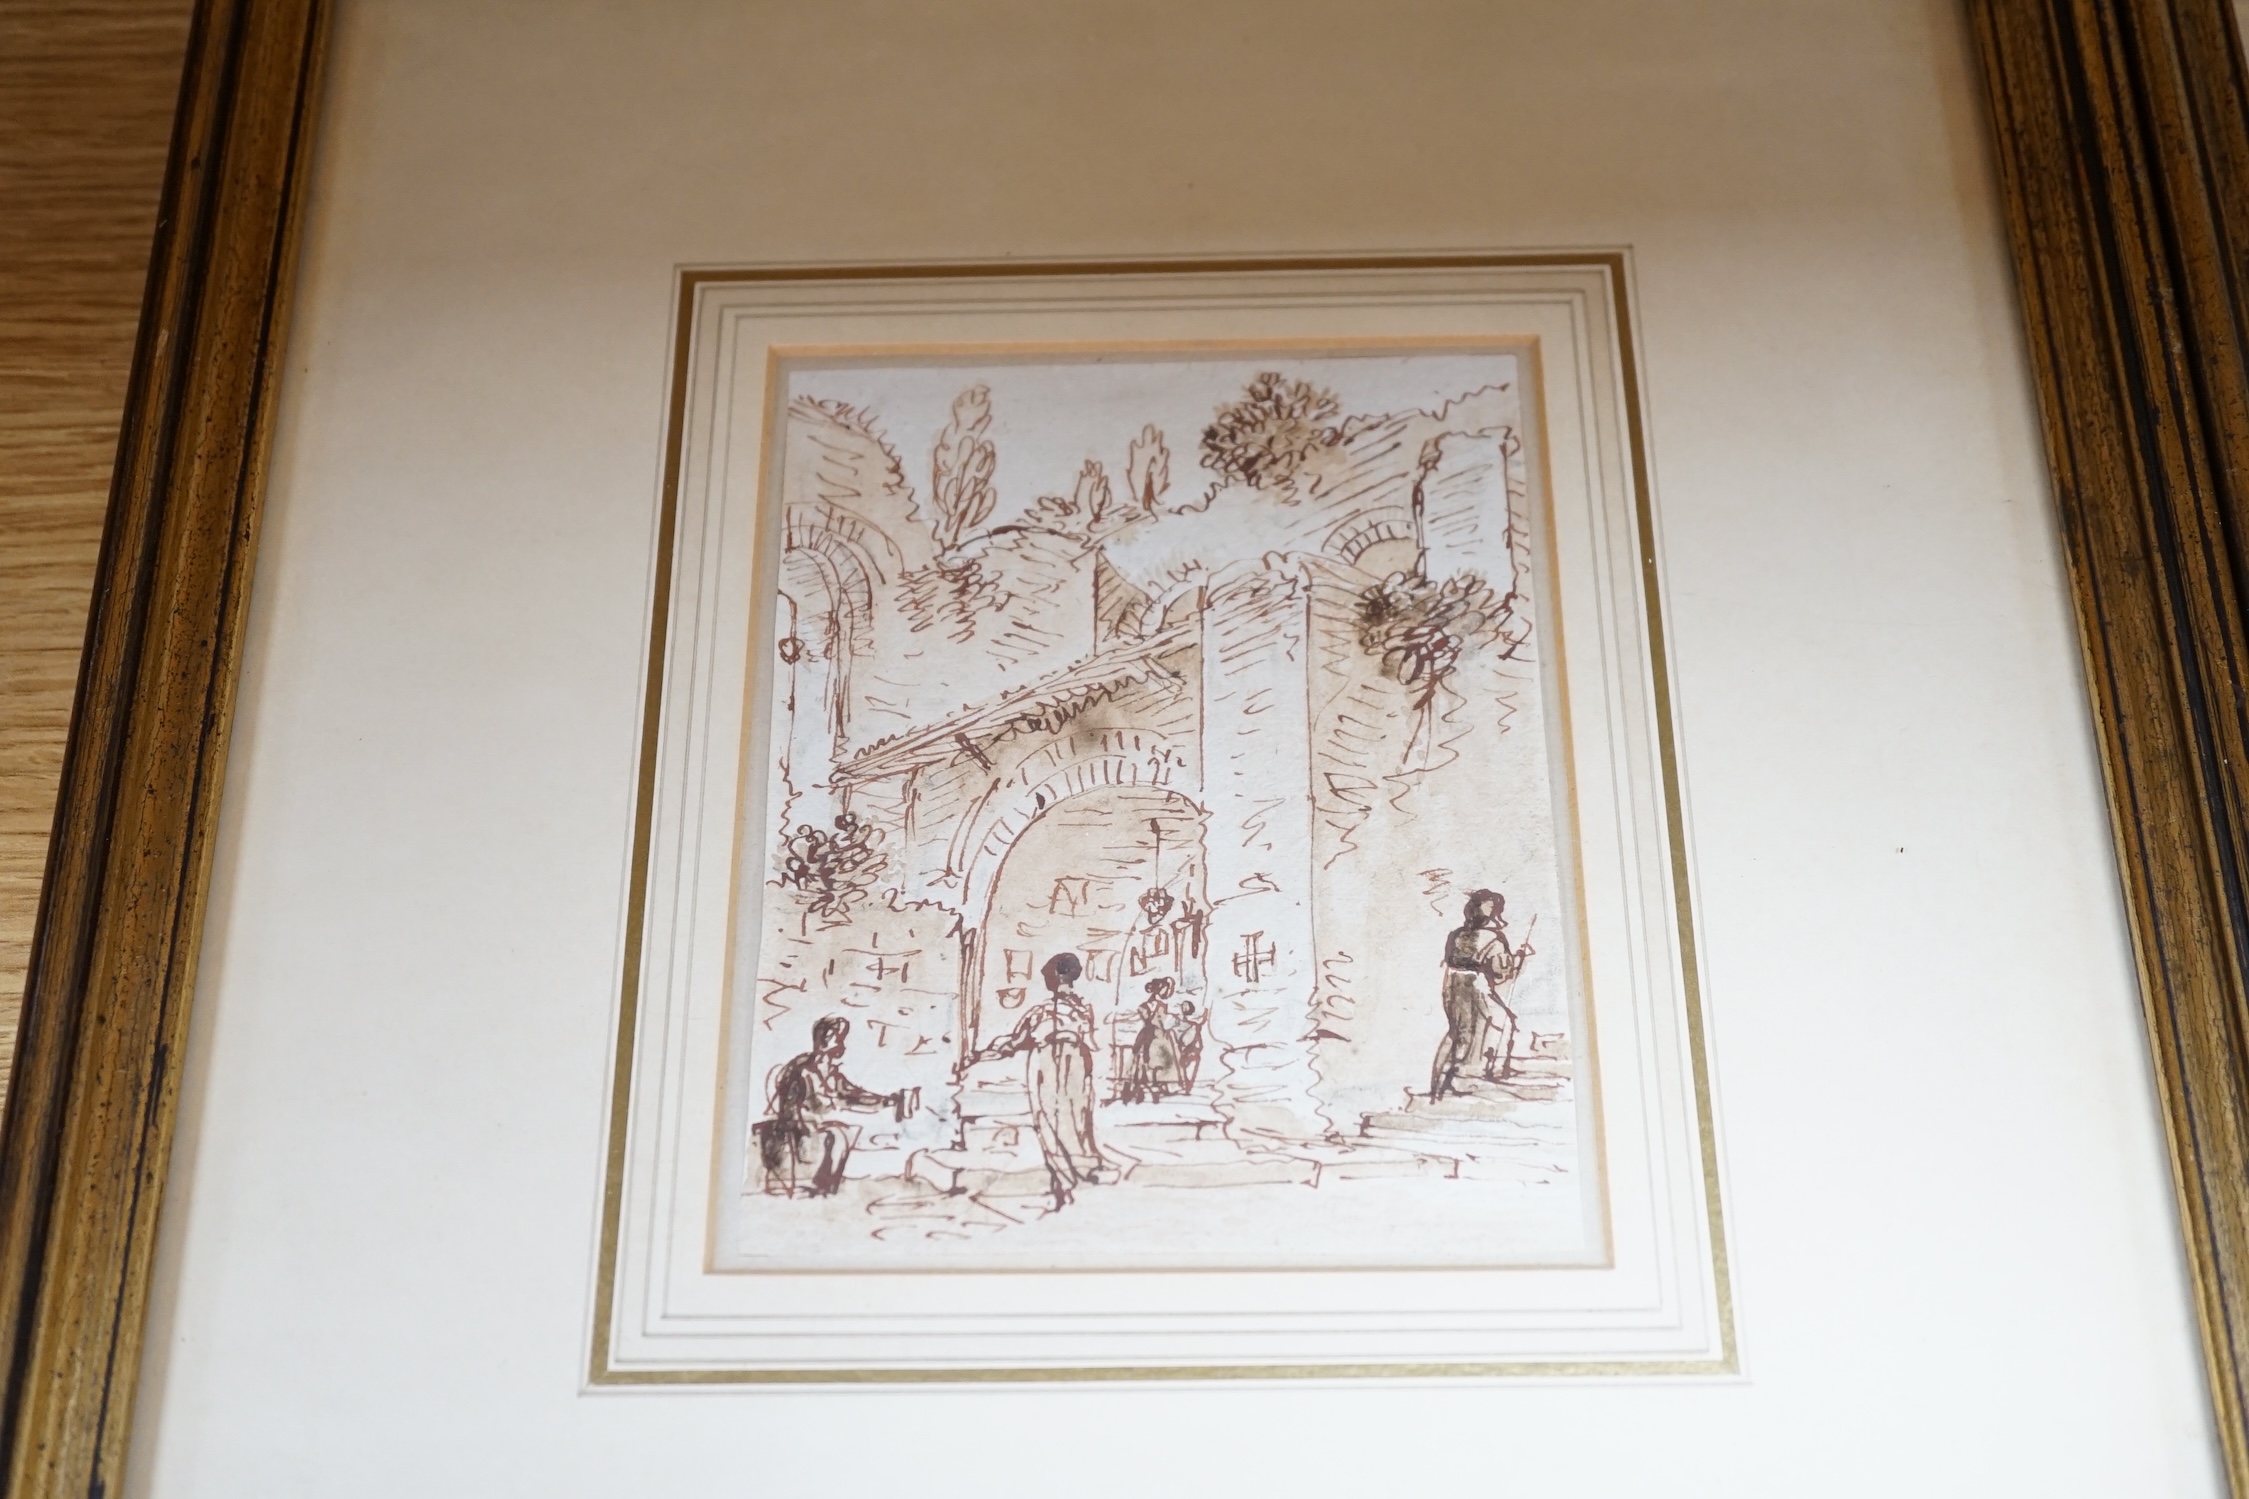 Four 18th/19th century Italian sepia ink sketches, including 'Figures near A Vasca, perhaps at Naples', largest 14 x 11cm. Condition - fair, some minor discolouration commensurate with age